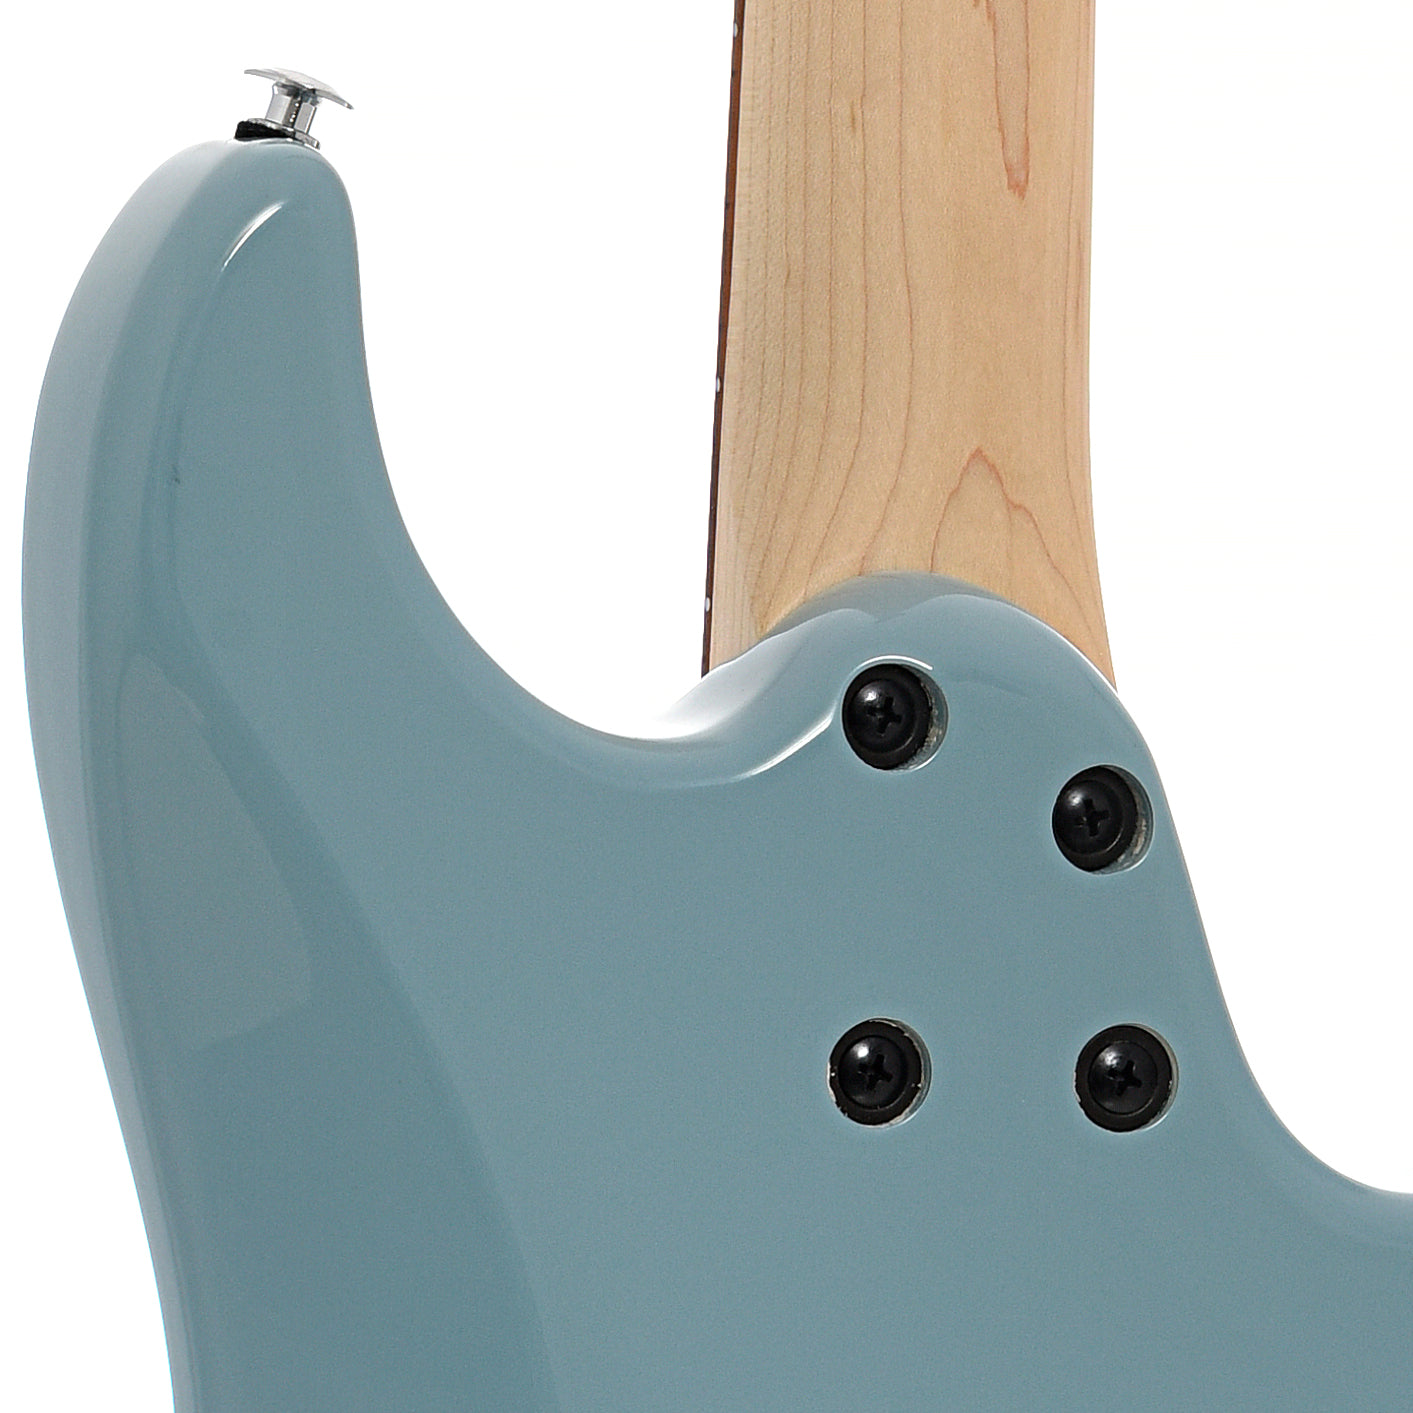 Neck joint of IBANEZ AZES40L Left Handed Electric Guitar, Purist Blue